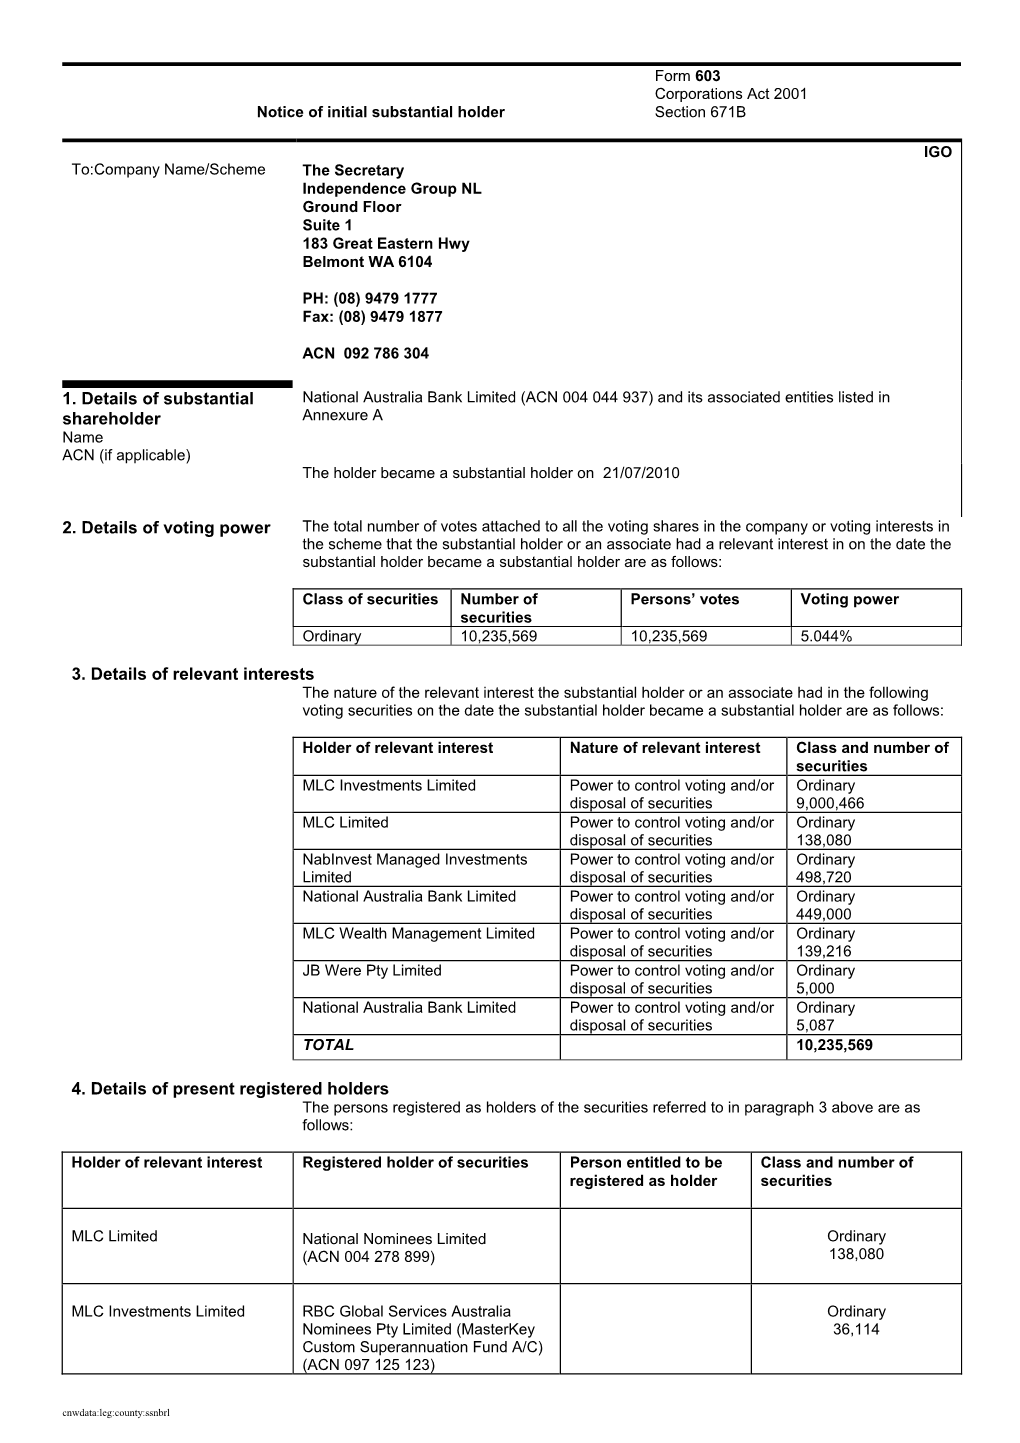 Corporations Law Form